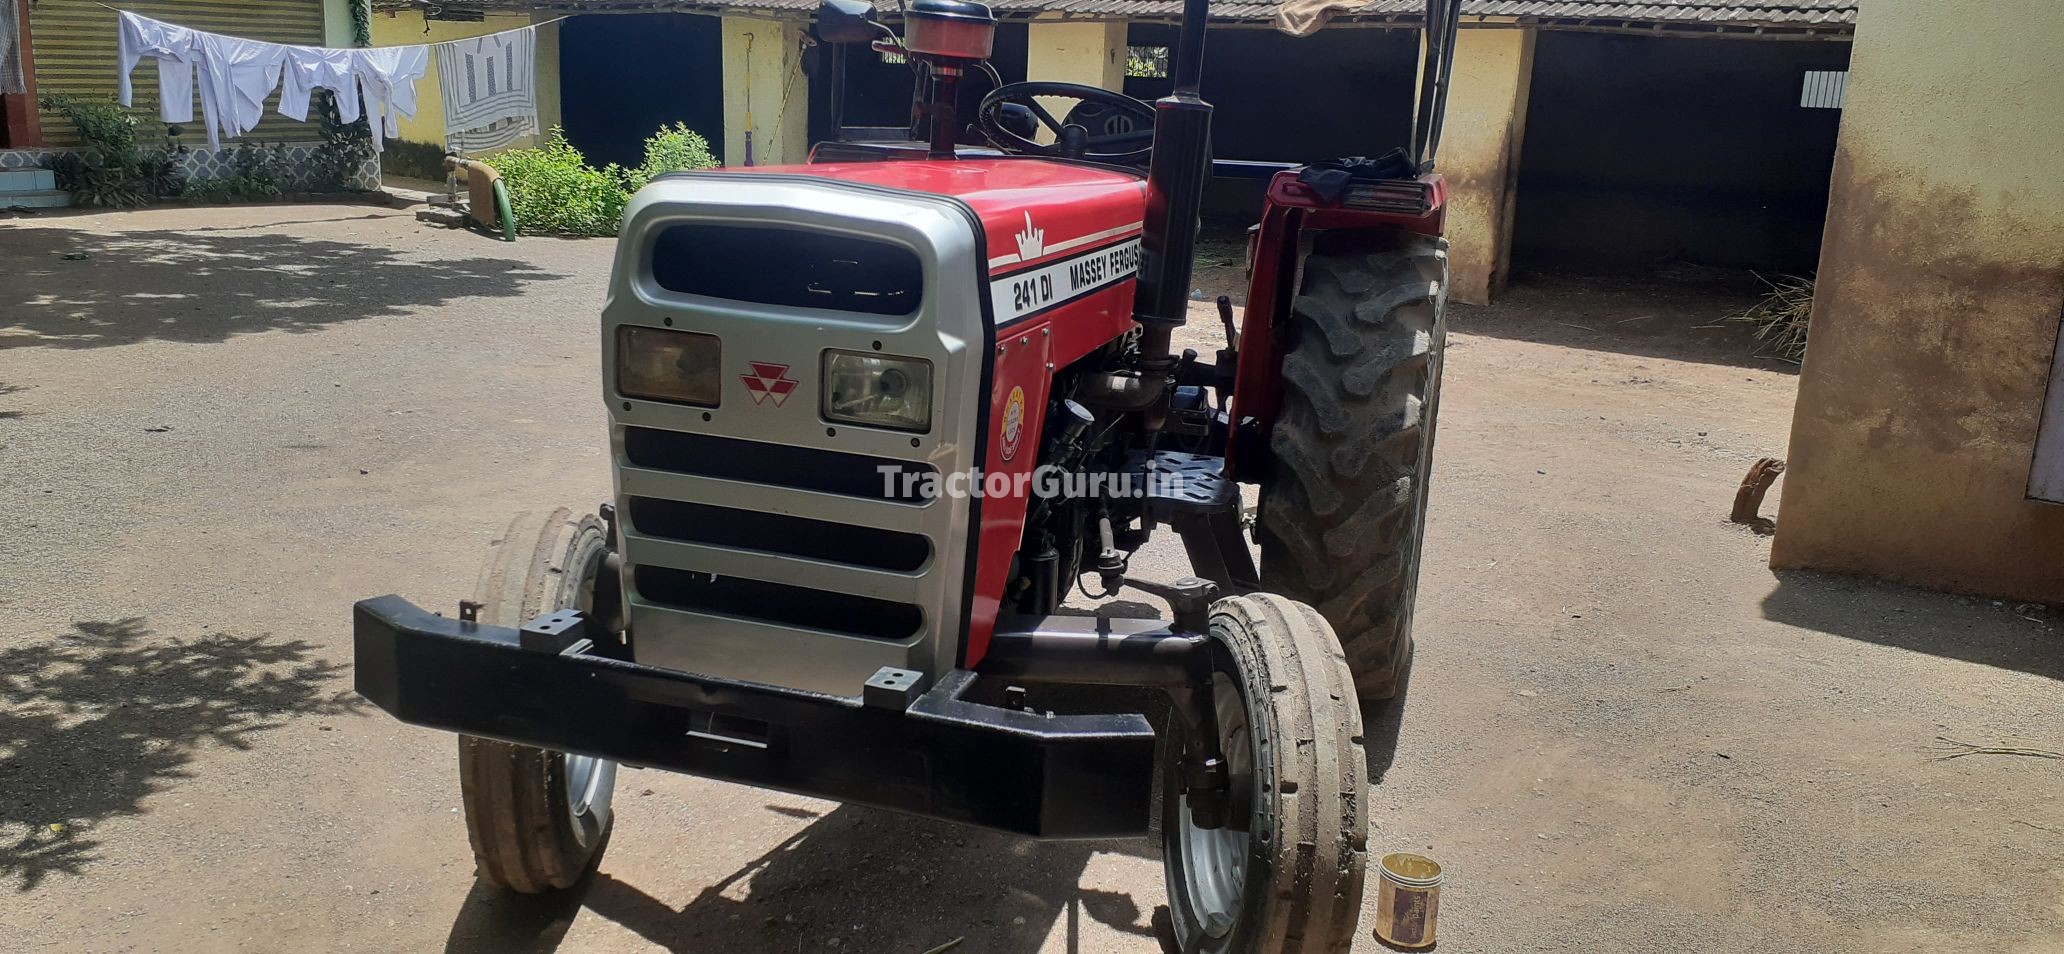 Get Second Hand Massey Ferguson 241 DI PLANETARY PLUS Tractor in Good ...